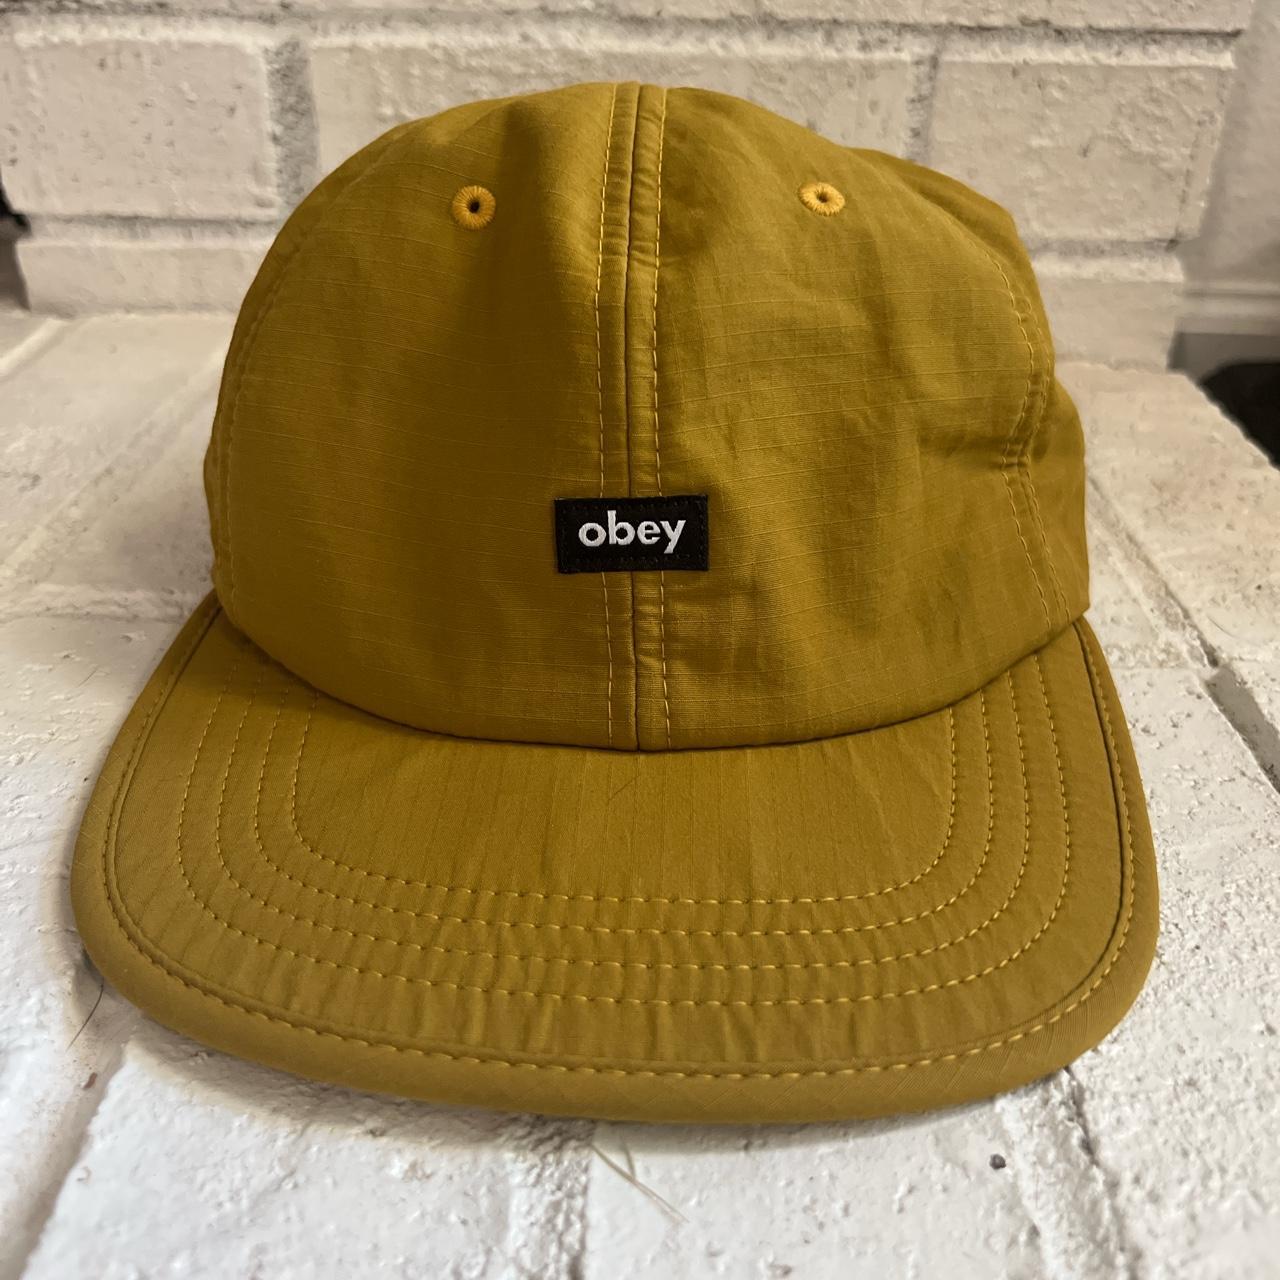 Obey Men's Yellow and Gold Hat